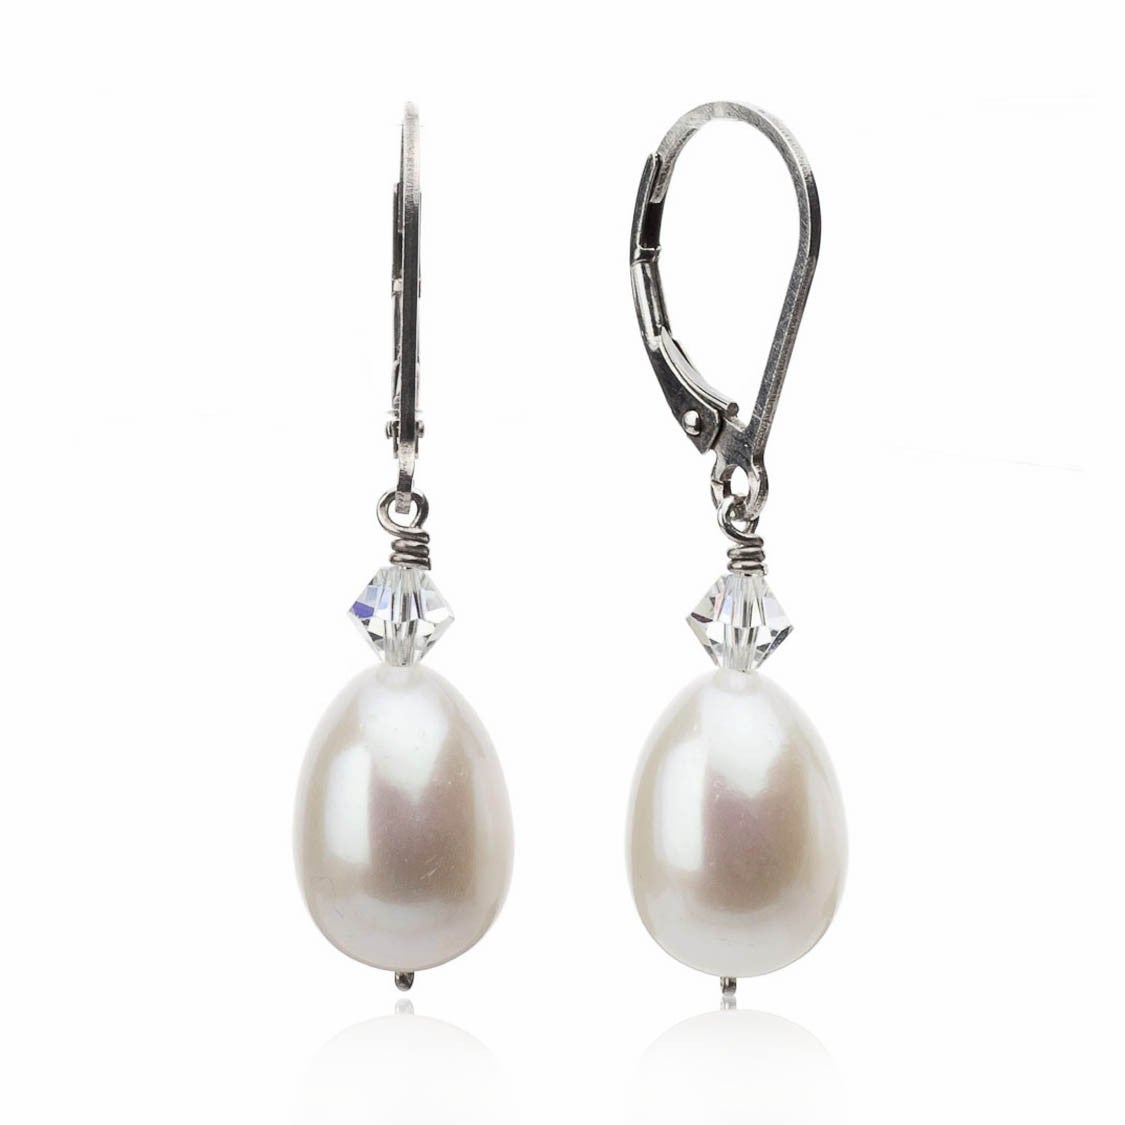 Real Pearl Dangle Earrings with Swarovski Crystal | Genuine Freshwater Cultured Pearls Jewelry,Earrings Bourdage Pearl Jewelry    sherri bourdage